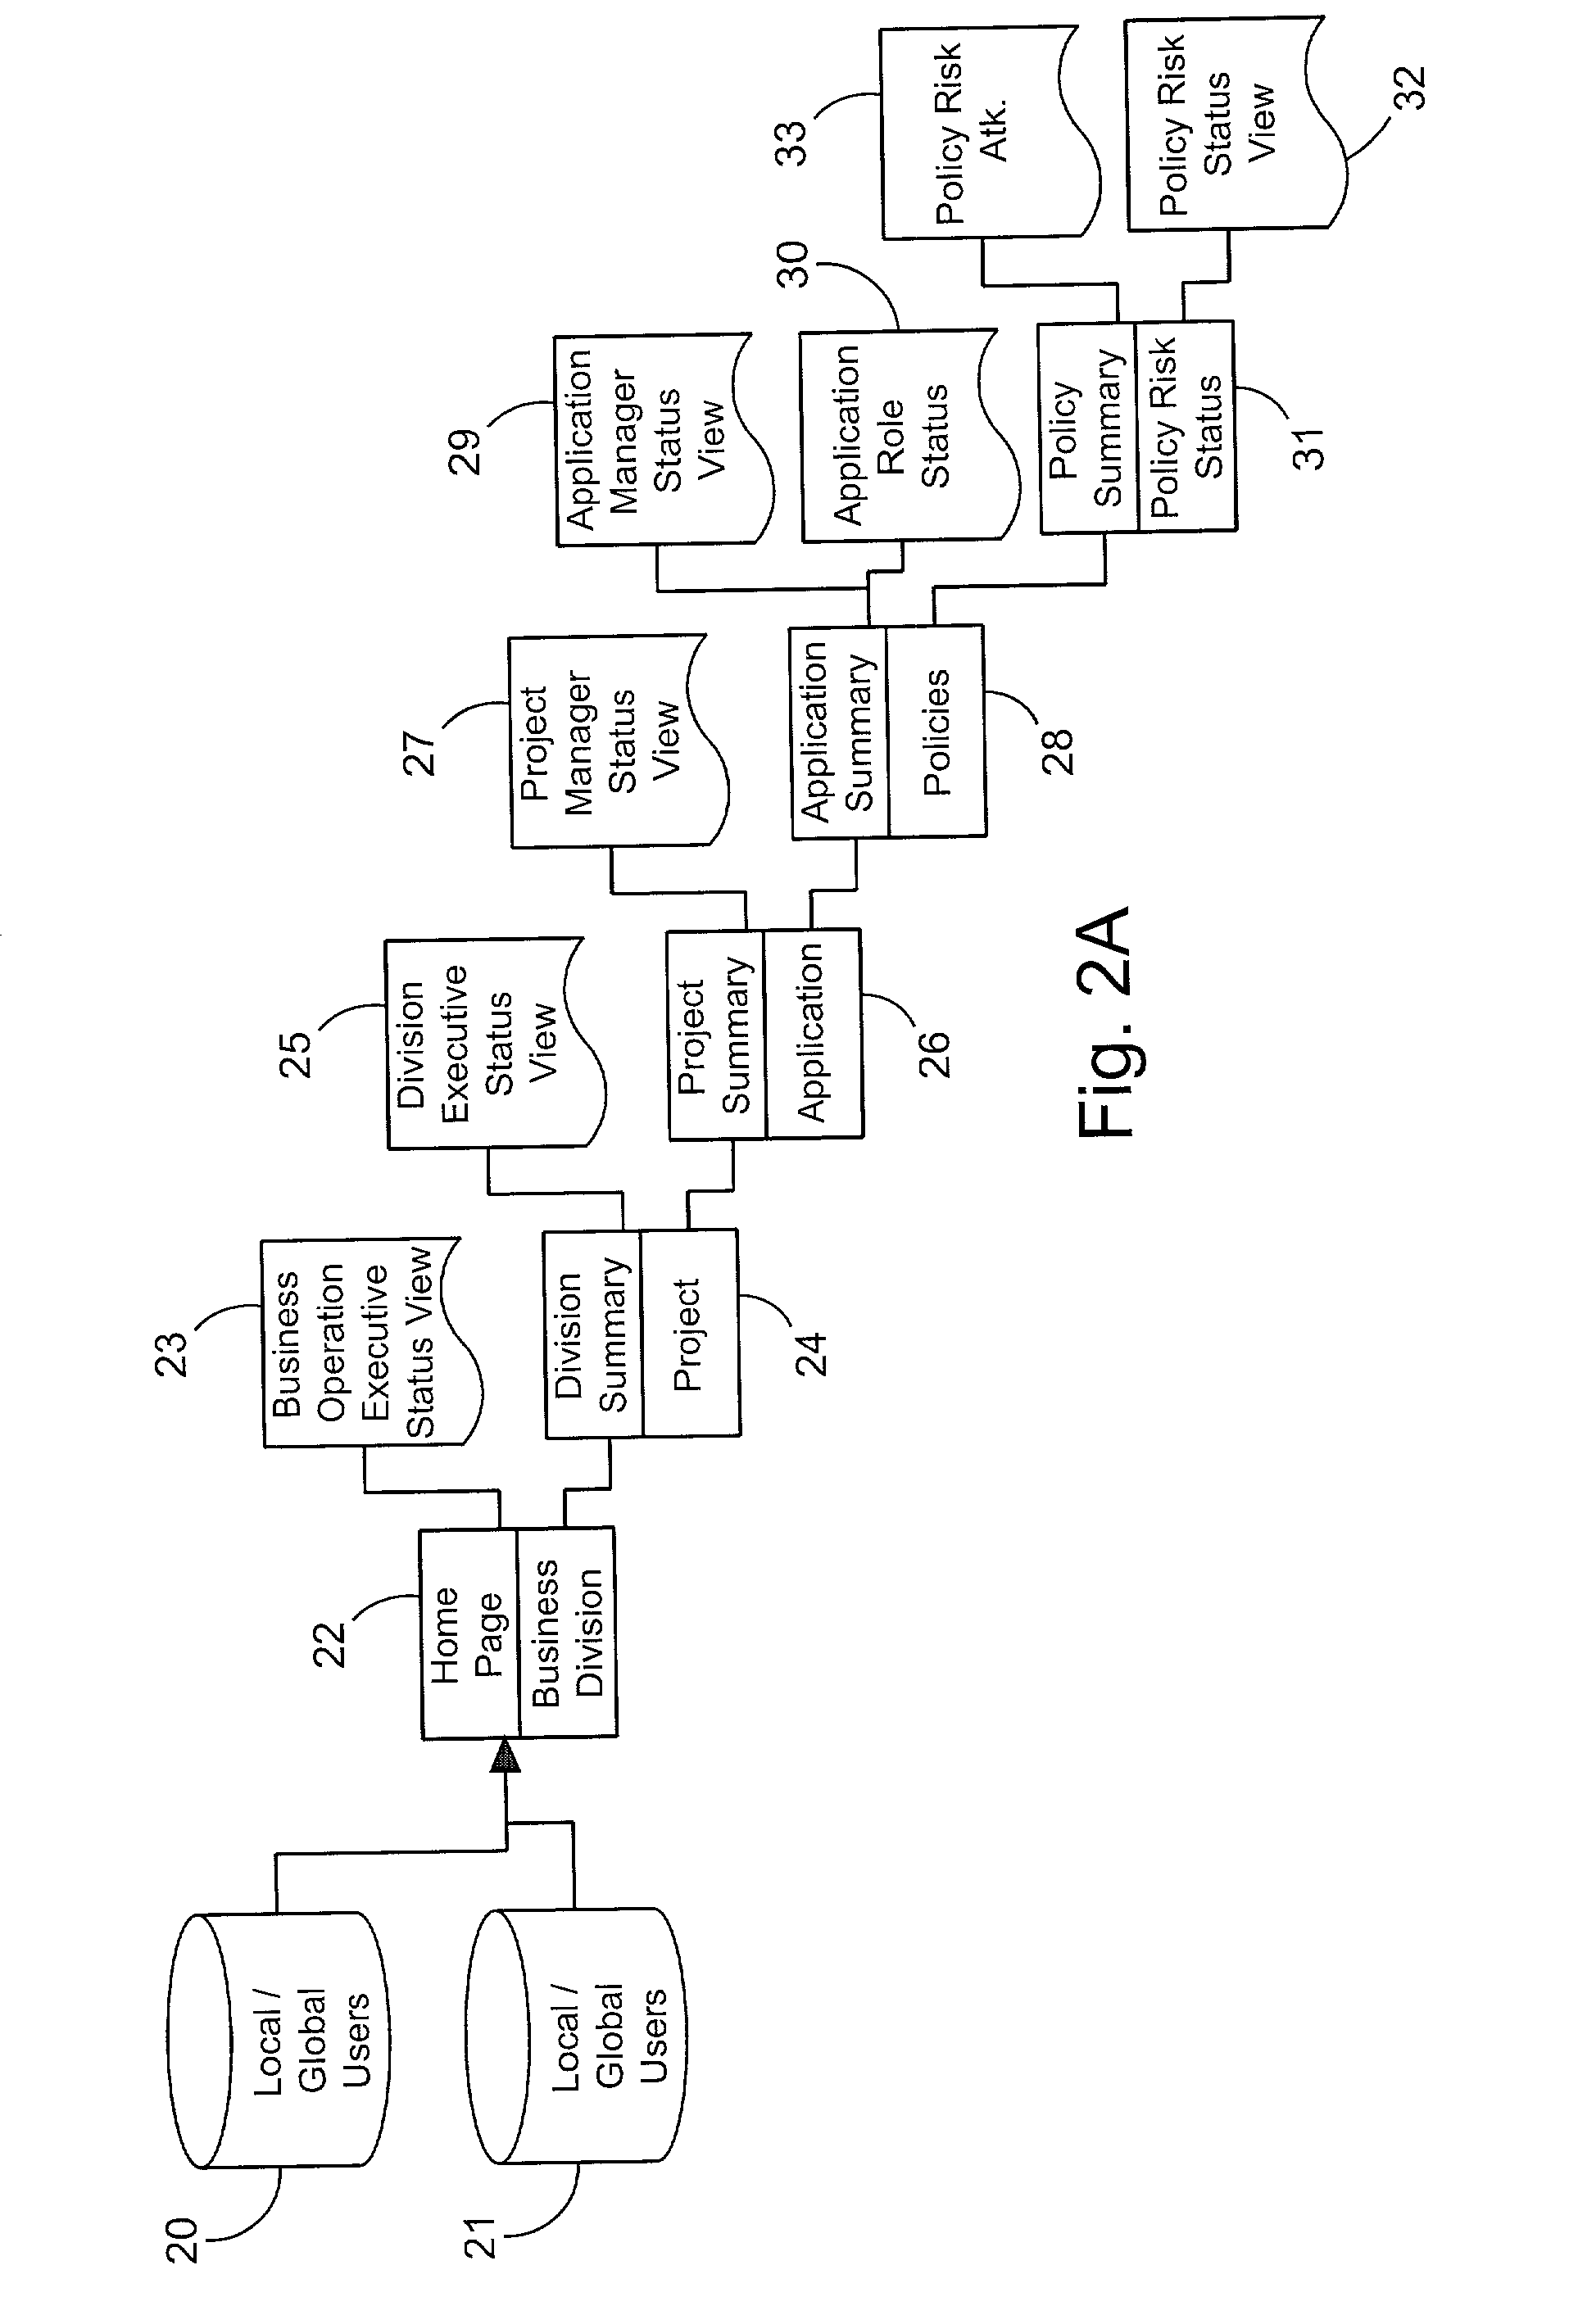 System and method for managing global risk